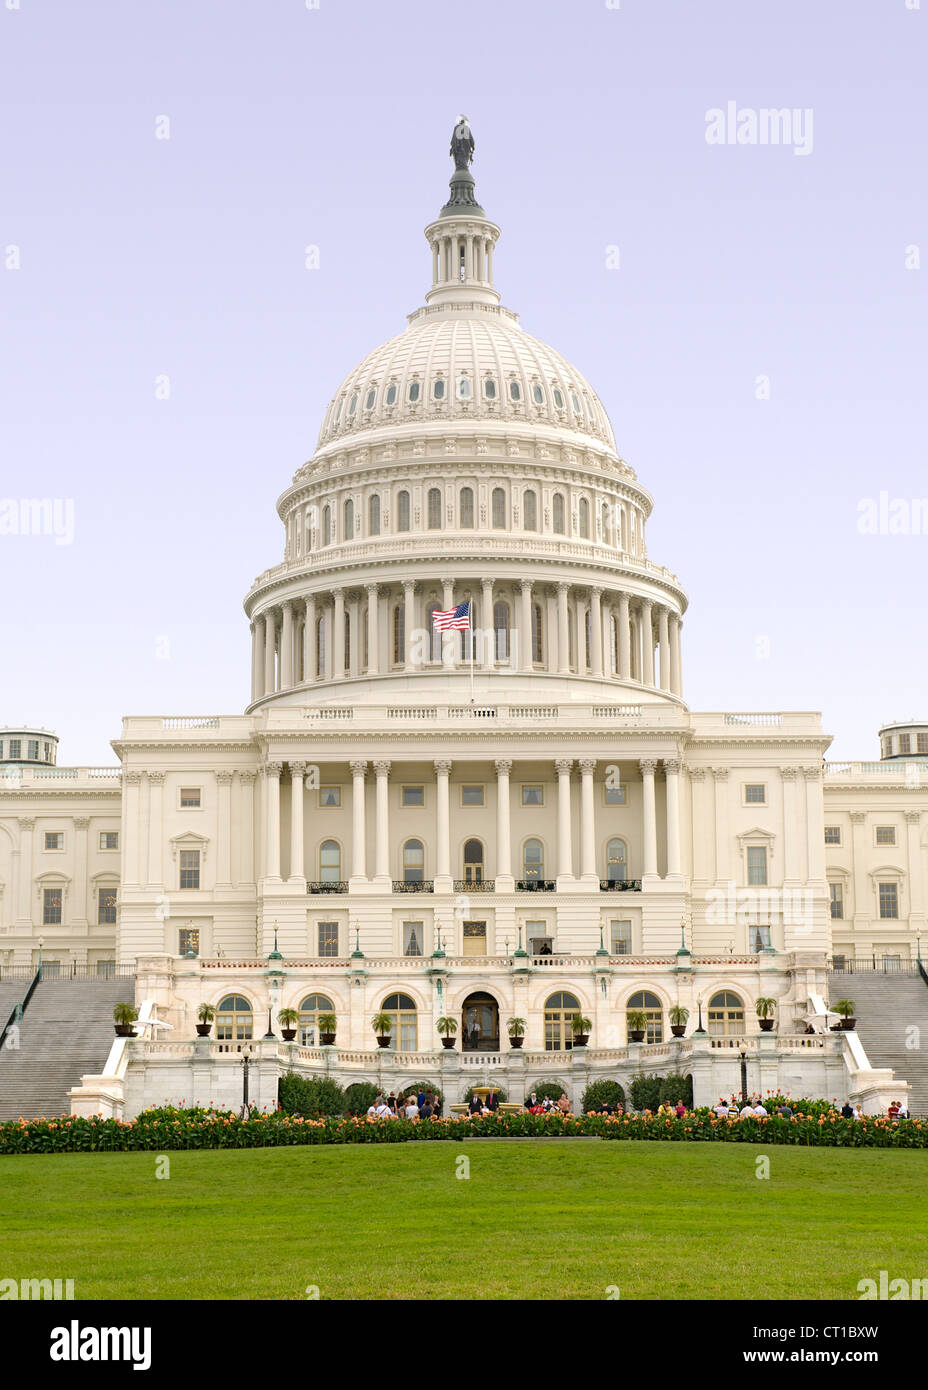 The Capitol building in Washington DC, USA. Stock Photo